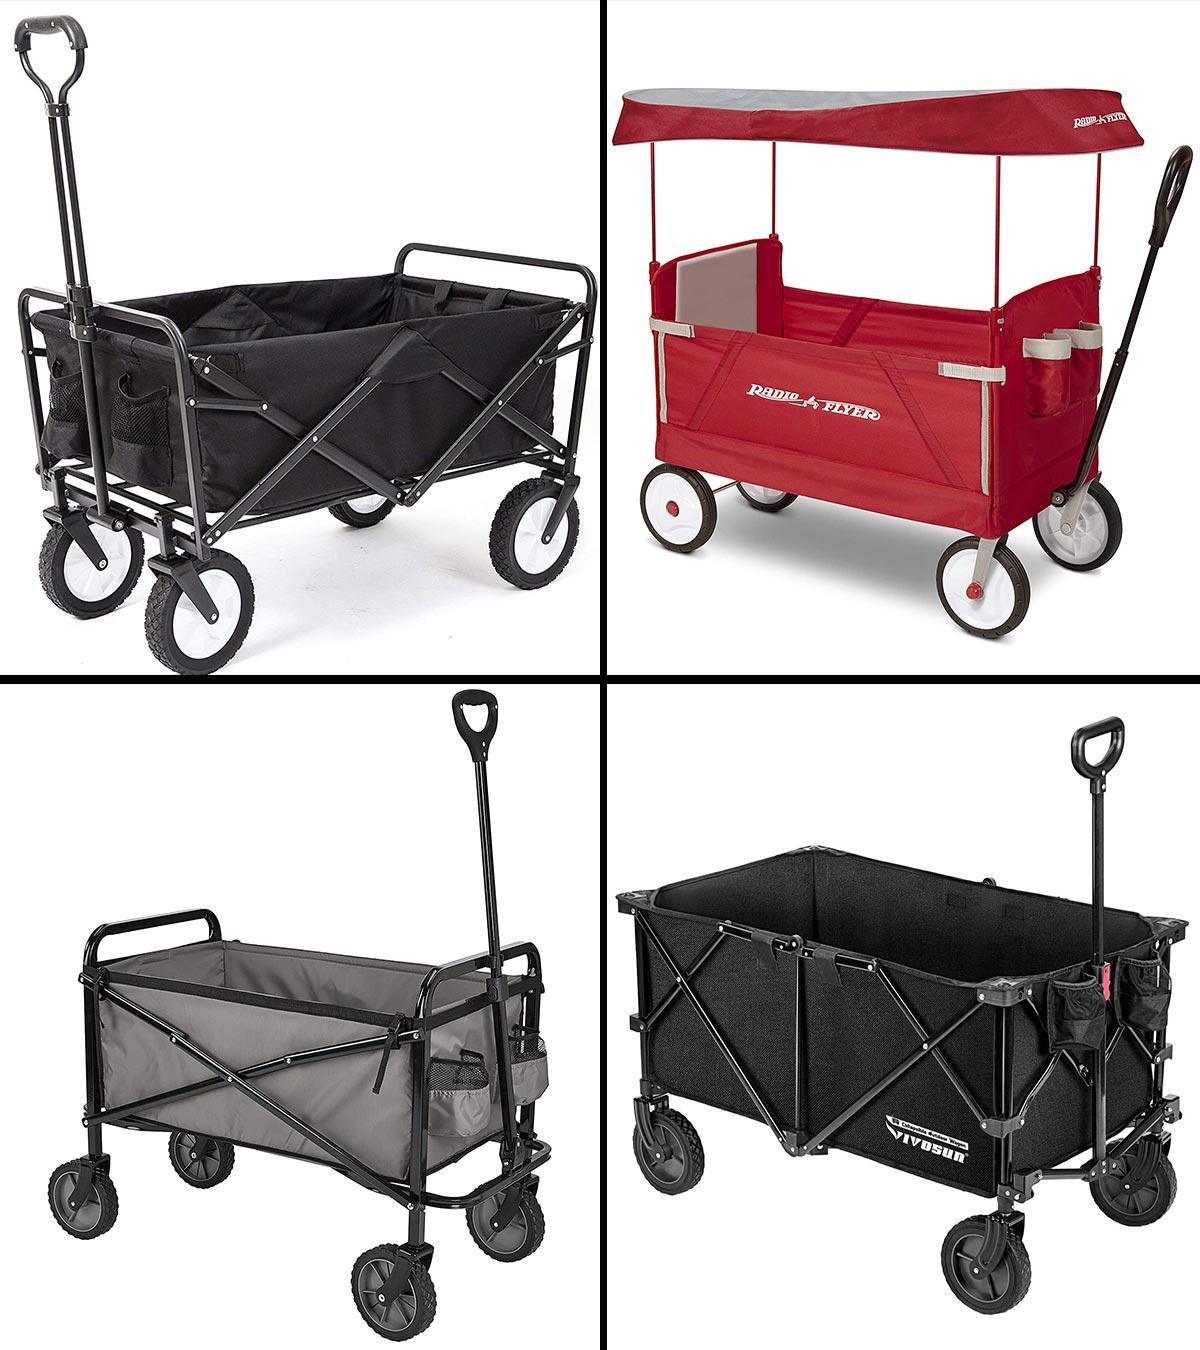 Hikenture Water-Resistant and Dirt-Proof Cover for Hikenture Folding Wagon 